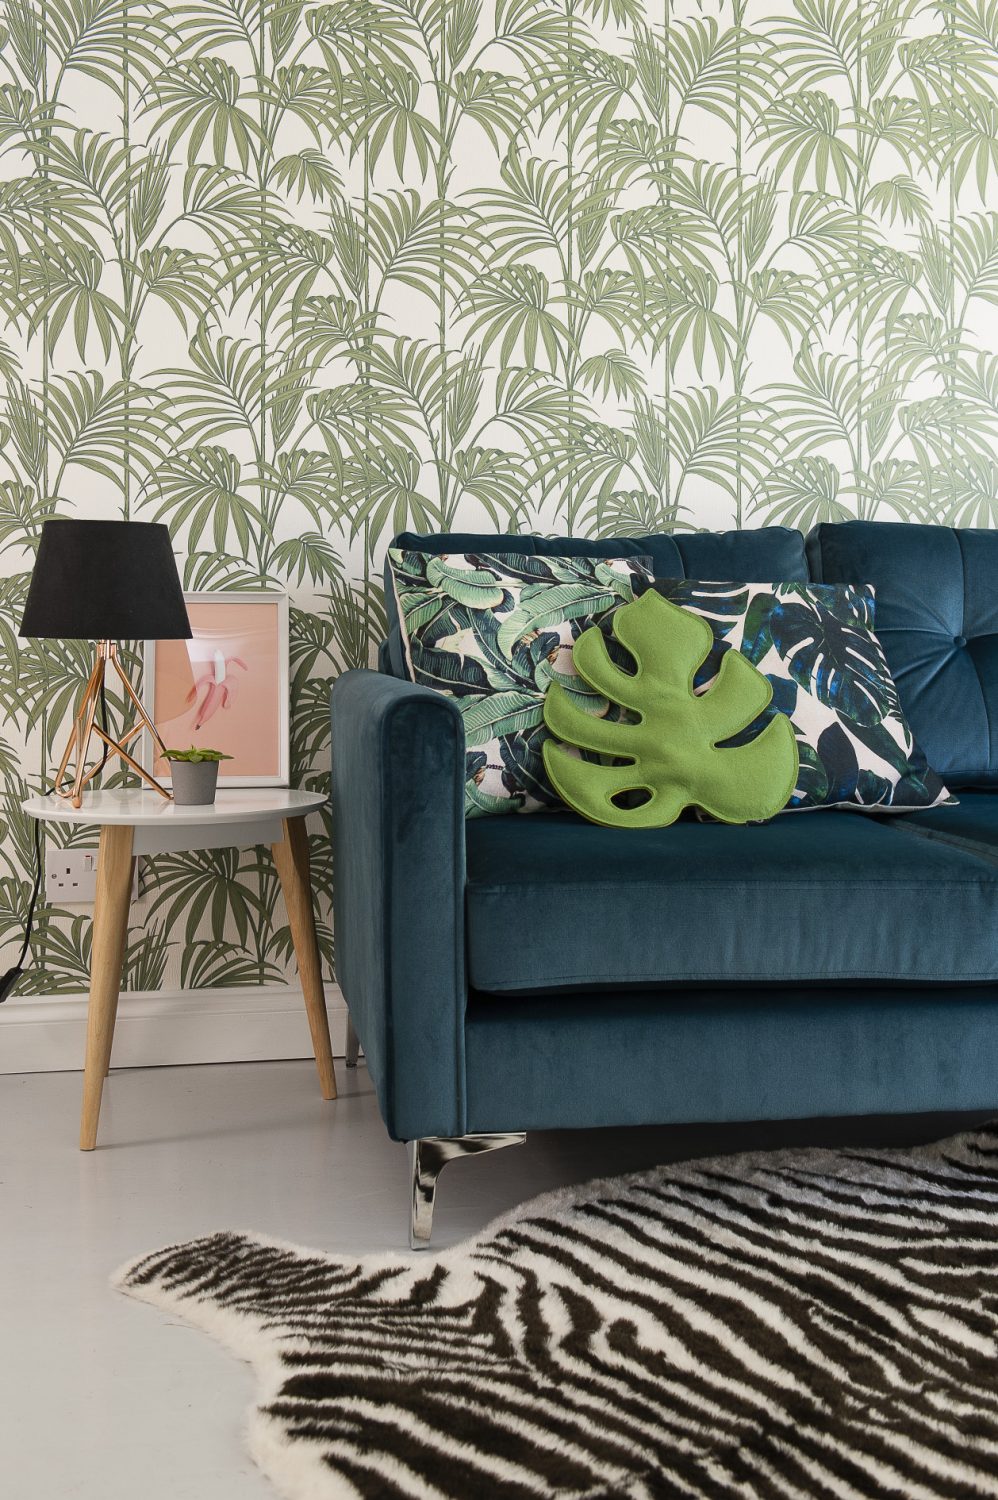 Lucinda sourced the velvet sofa in the playroom from DFS and the zebra rug is IKEA. The wallpaper is ‘Honolulu’ Palm Green from Graham & Brown